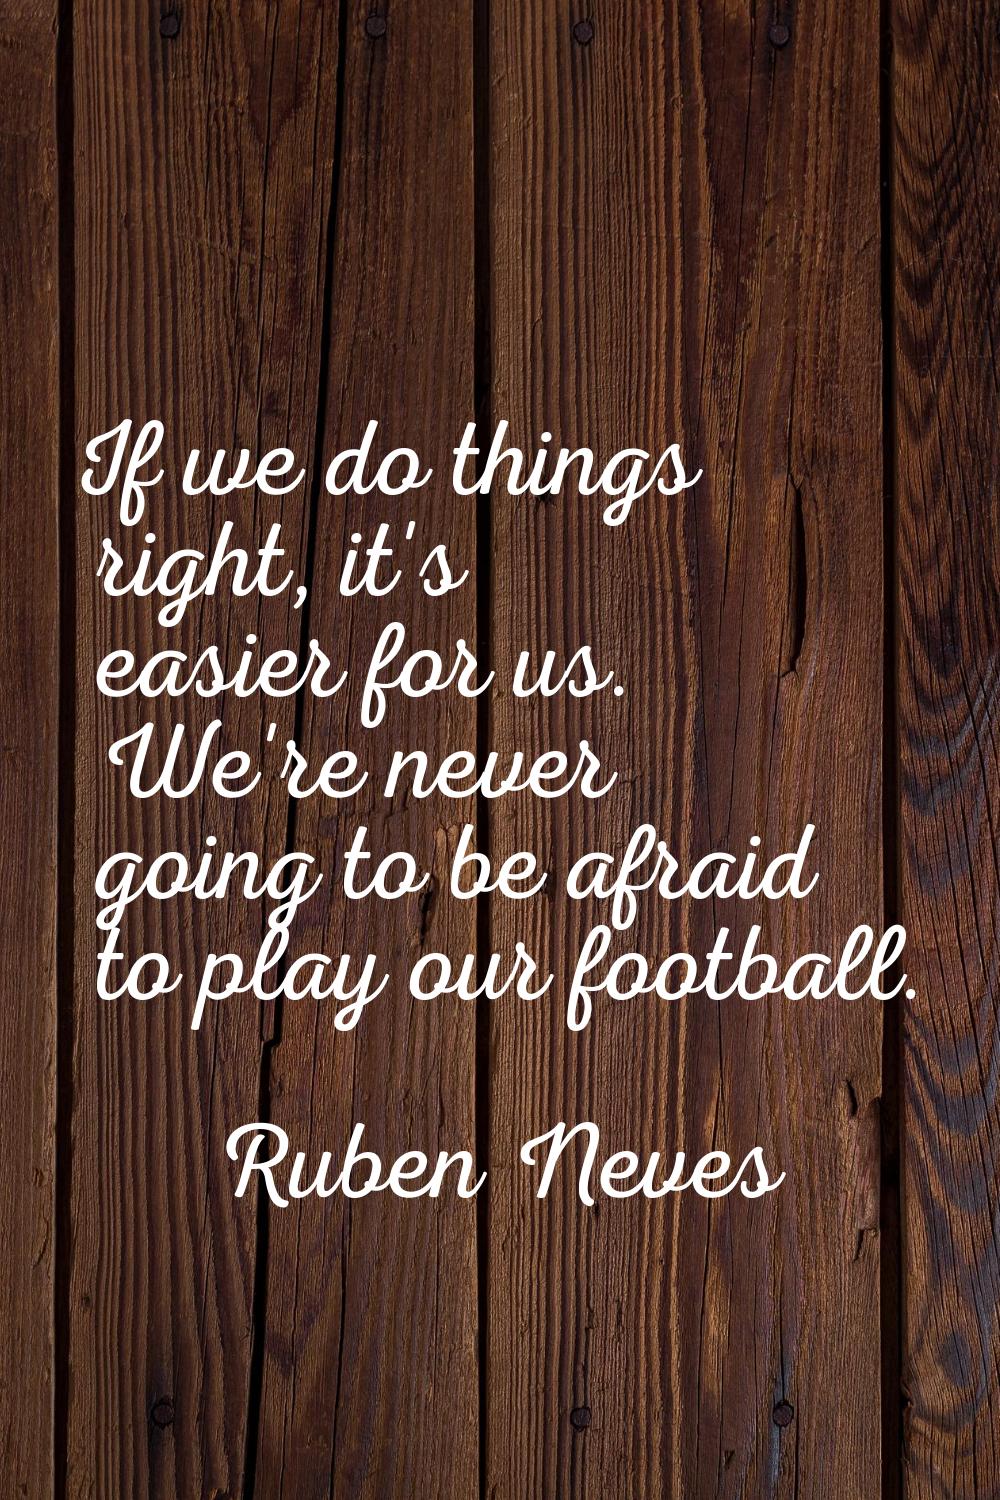 If we do things right, it's easier for us. We're never going to be afraid to play our football.